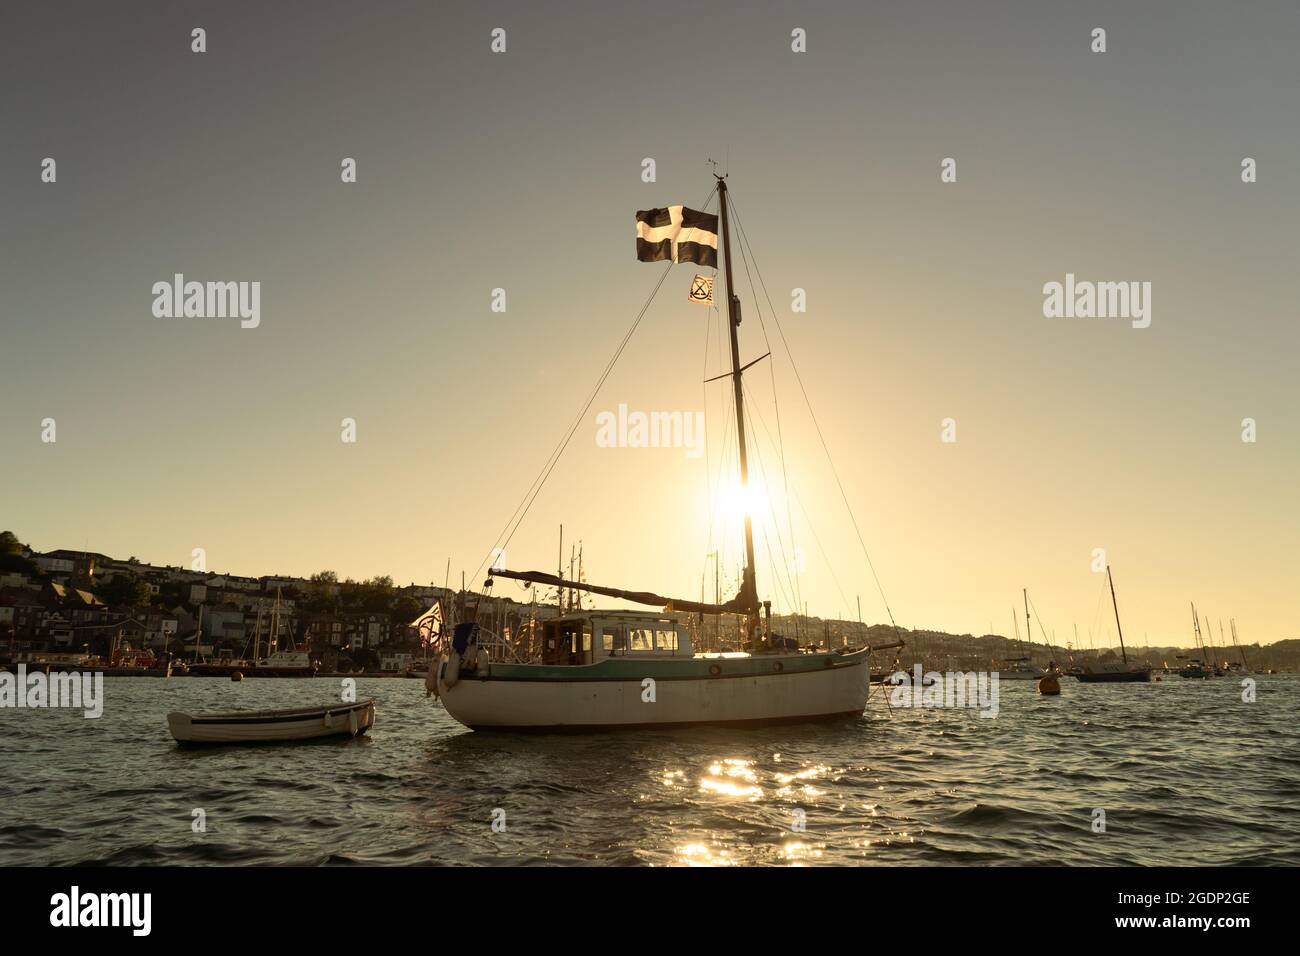 FALMOUTH, UNITED KINGDOM - Jun 12, 2021: The Falmouth Classics sailing event basks in glorious sunshine as the world's leaders meet at the G7 summit a Stock Photo